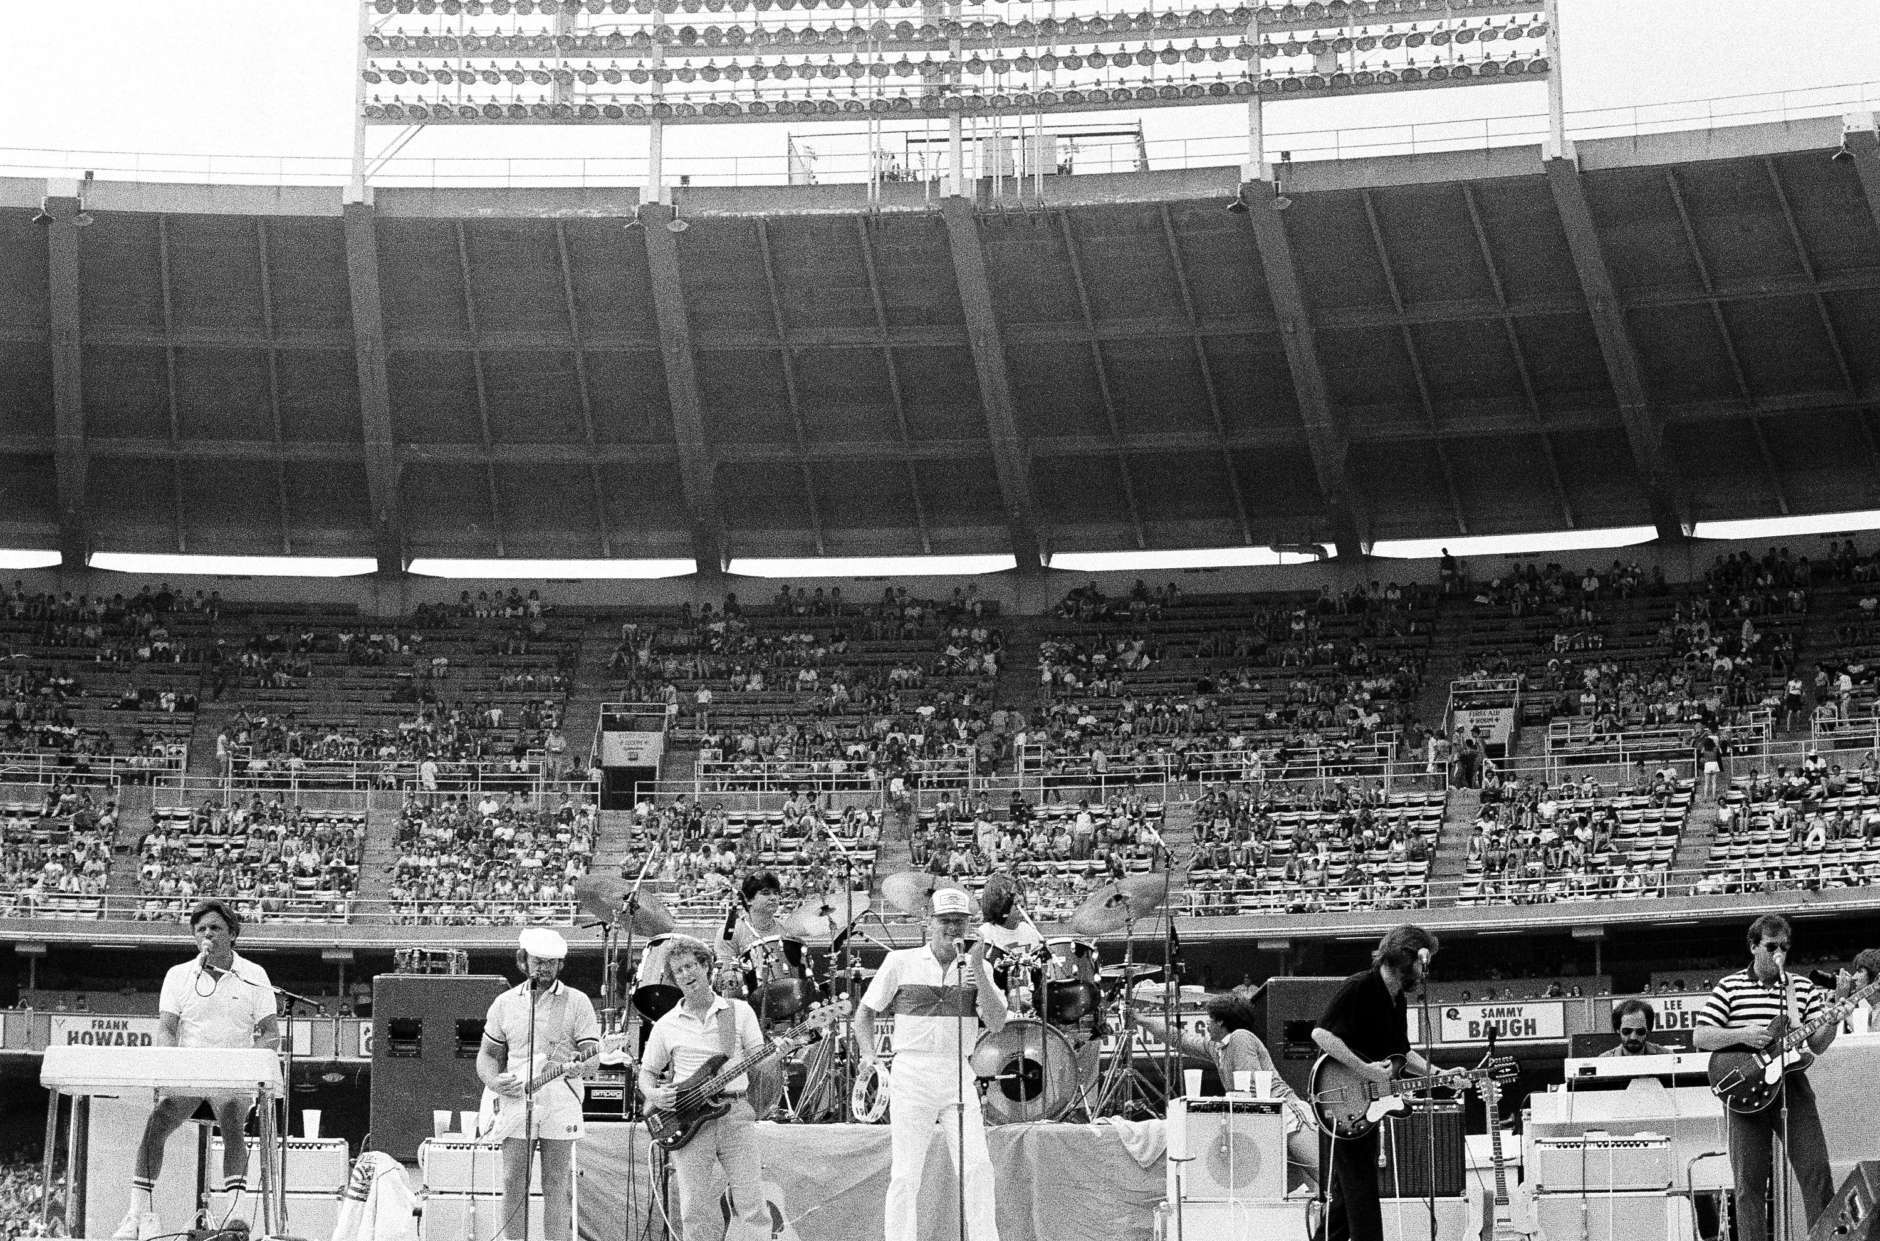 Beach Boys perform their opening number at RFK Stadium in Washingto, June 12, 1983. The Beach Boys held their concert after the Team America-Ft. Lauderdale Strikers soccer game. (AP Photo/Ira Schwarz)